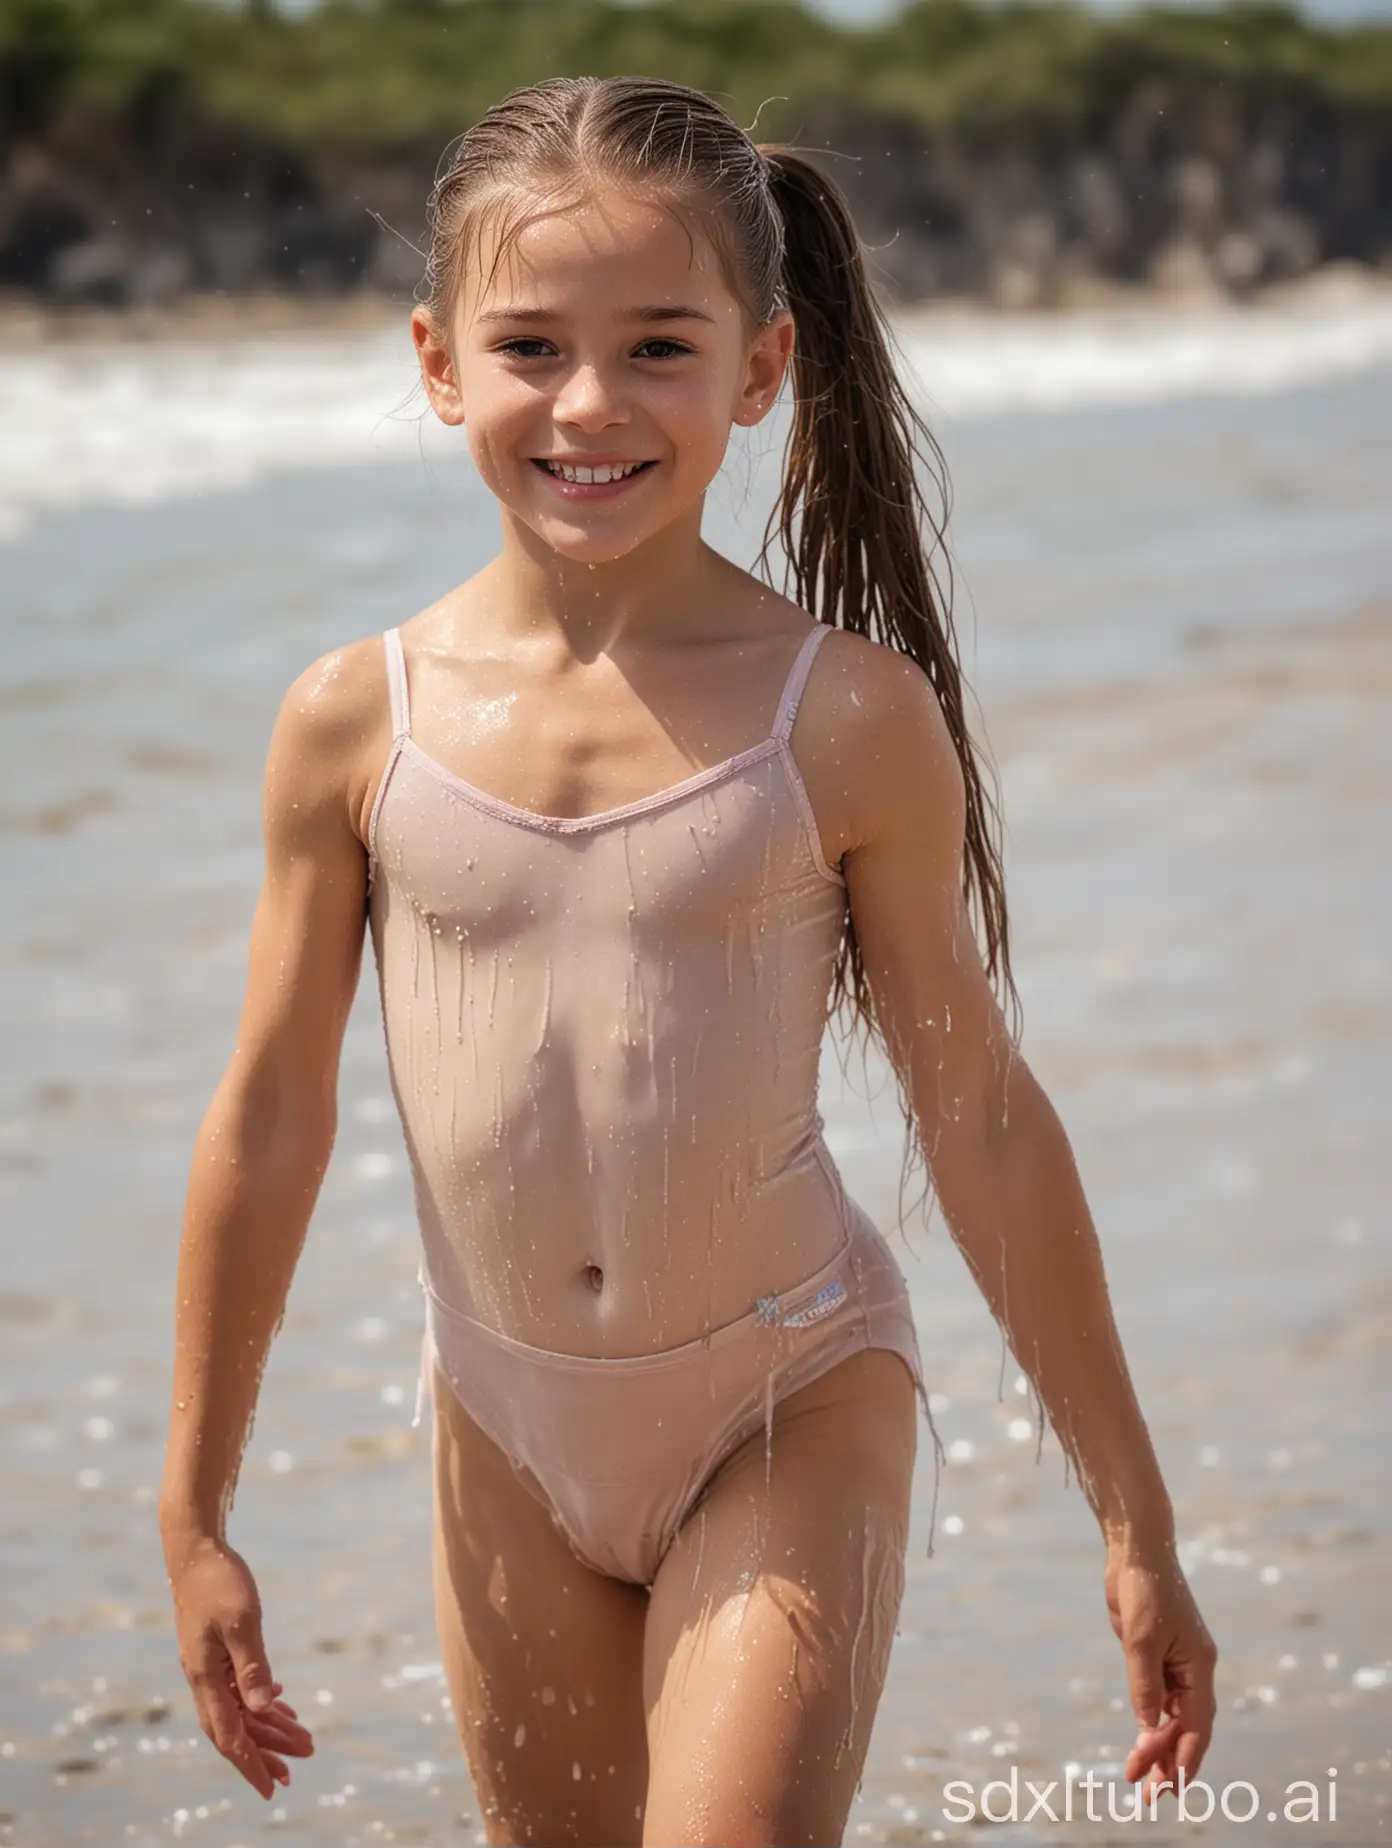 Smiling-8YearOld-Ballet-Dancer-Girl-with-Muscular-Physique-at-Beach